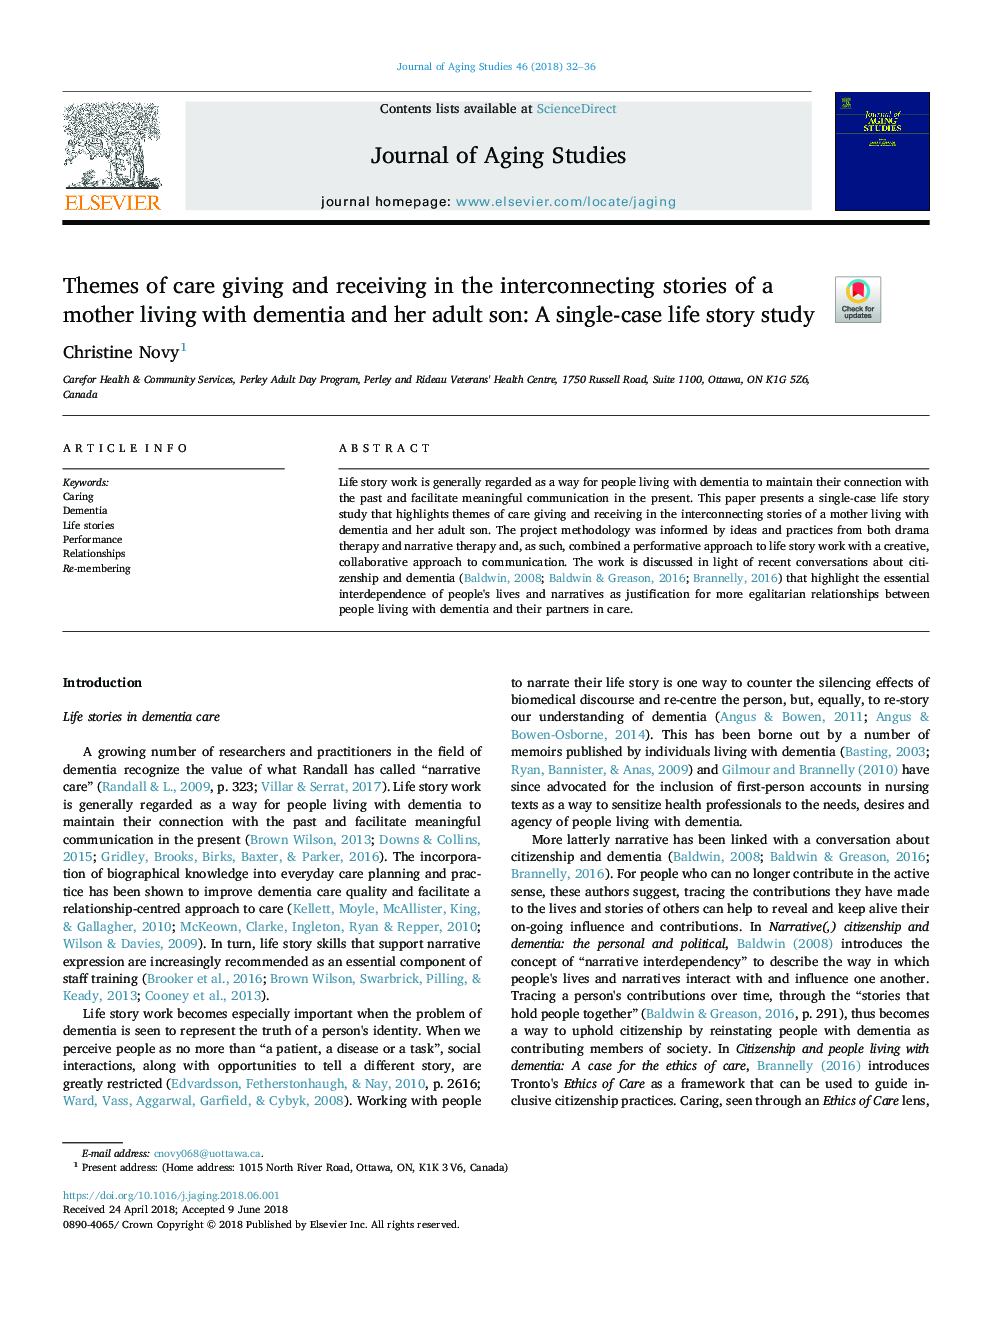 Themes of care giving and receiving in the interconnecting stories of a mother living with dementia and her adult son: A single-case life story study